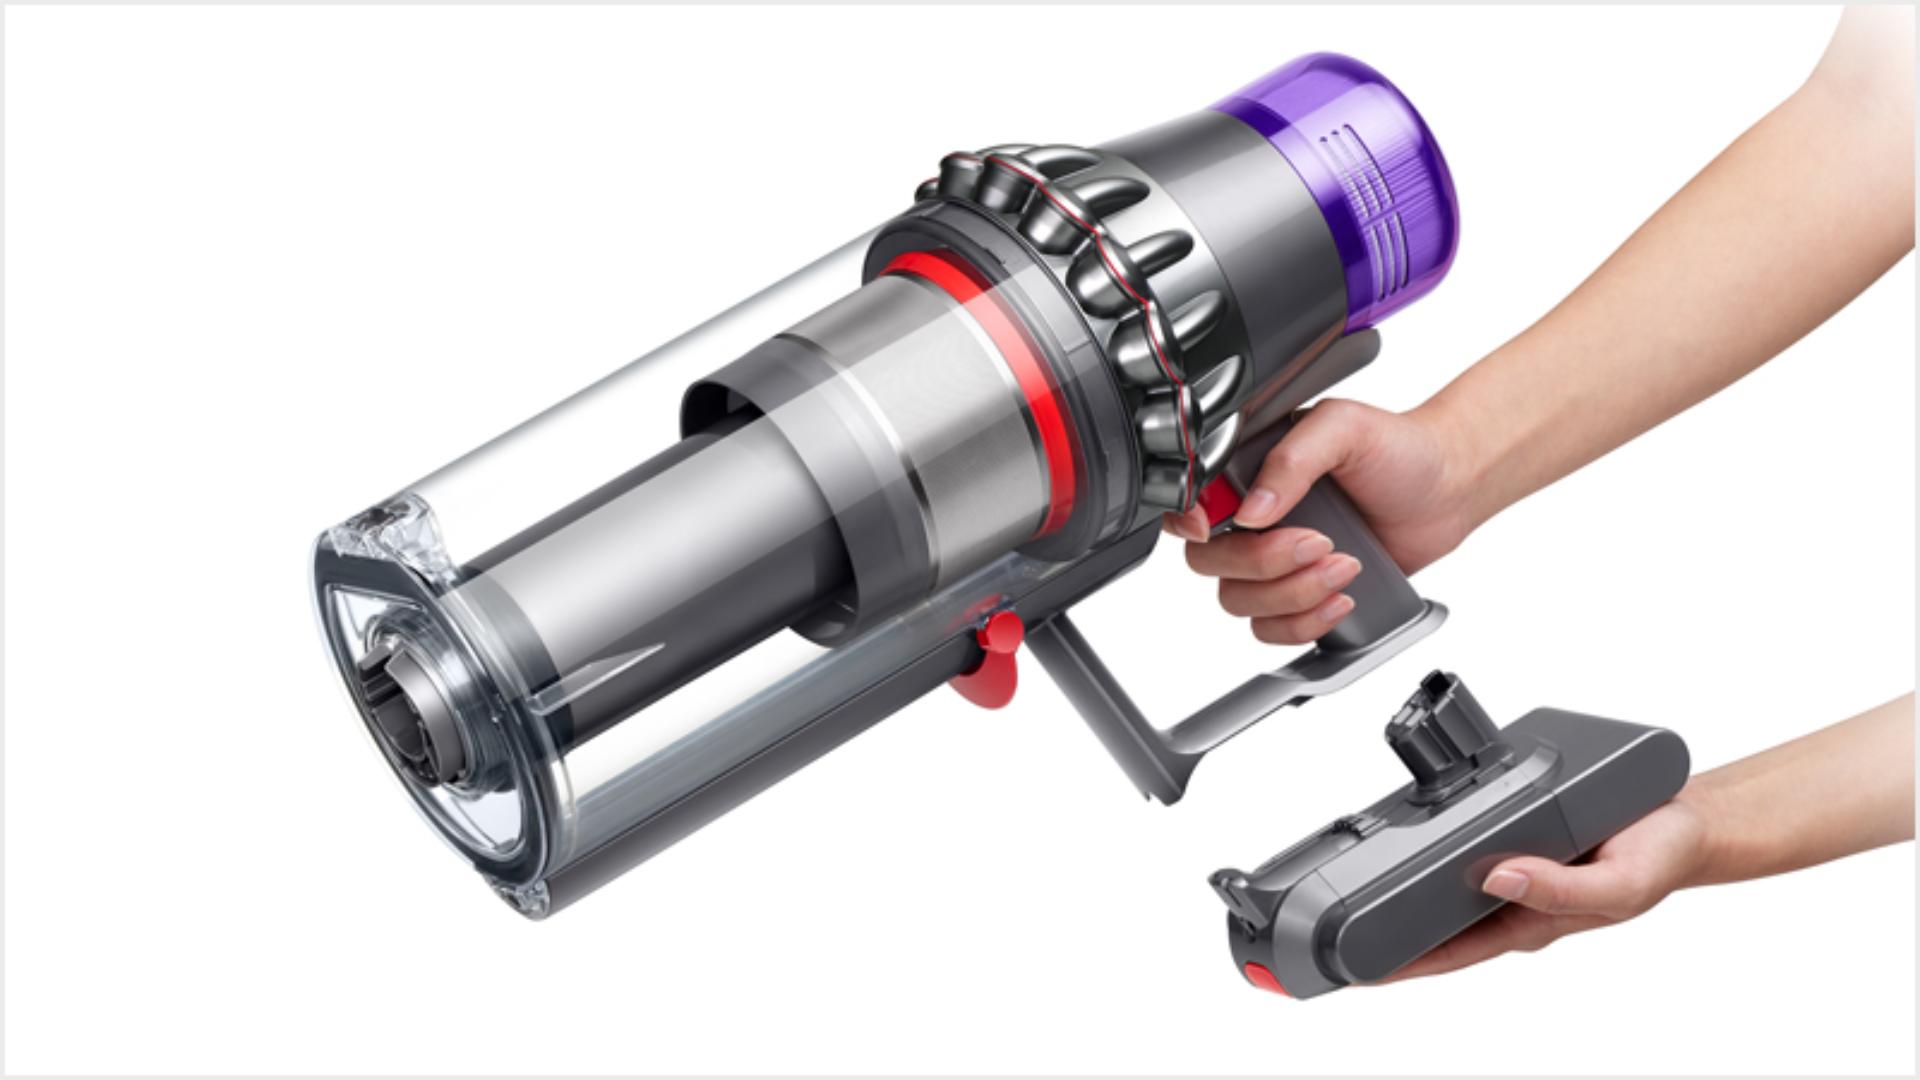 Hands attaching a Click-in battery to the Dyson Outsize vacuum